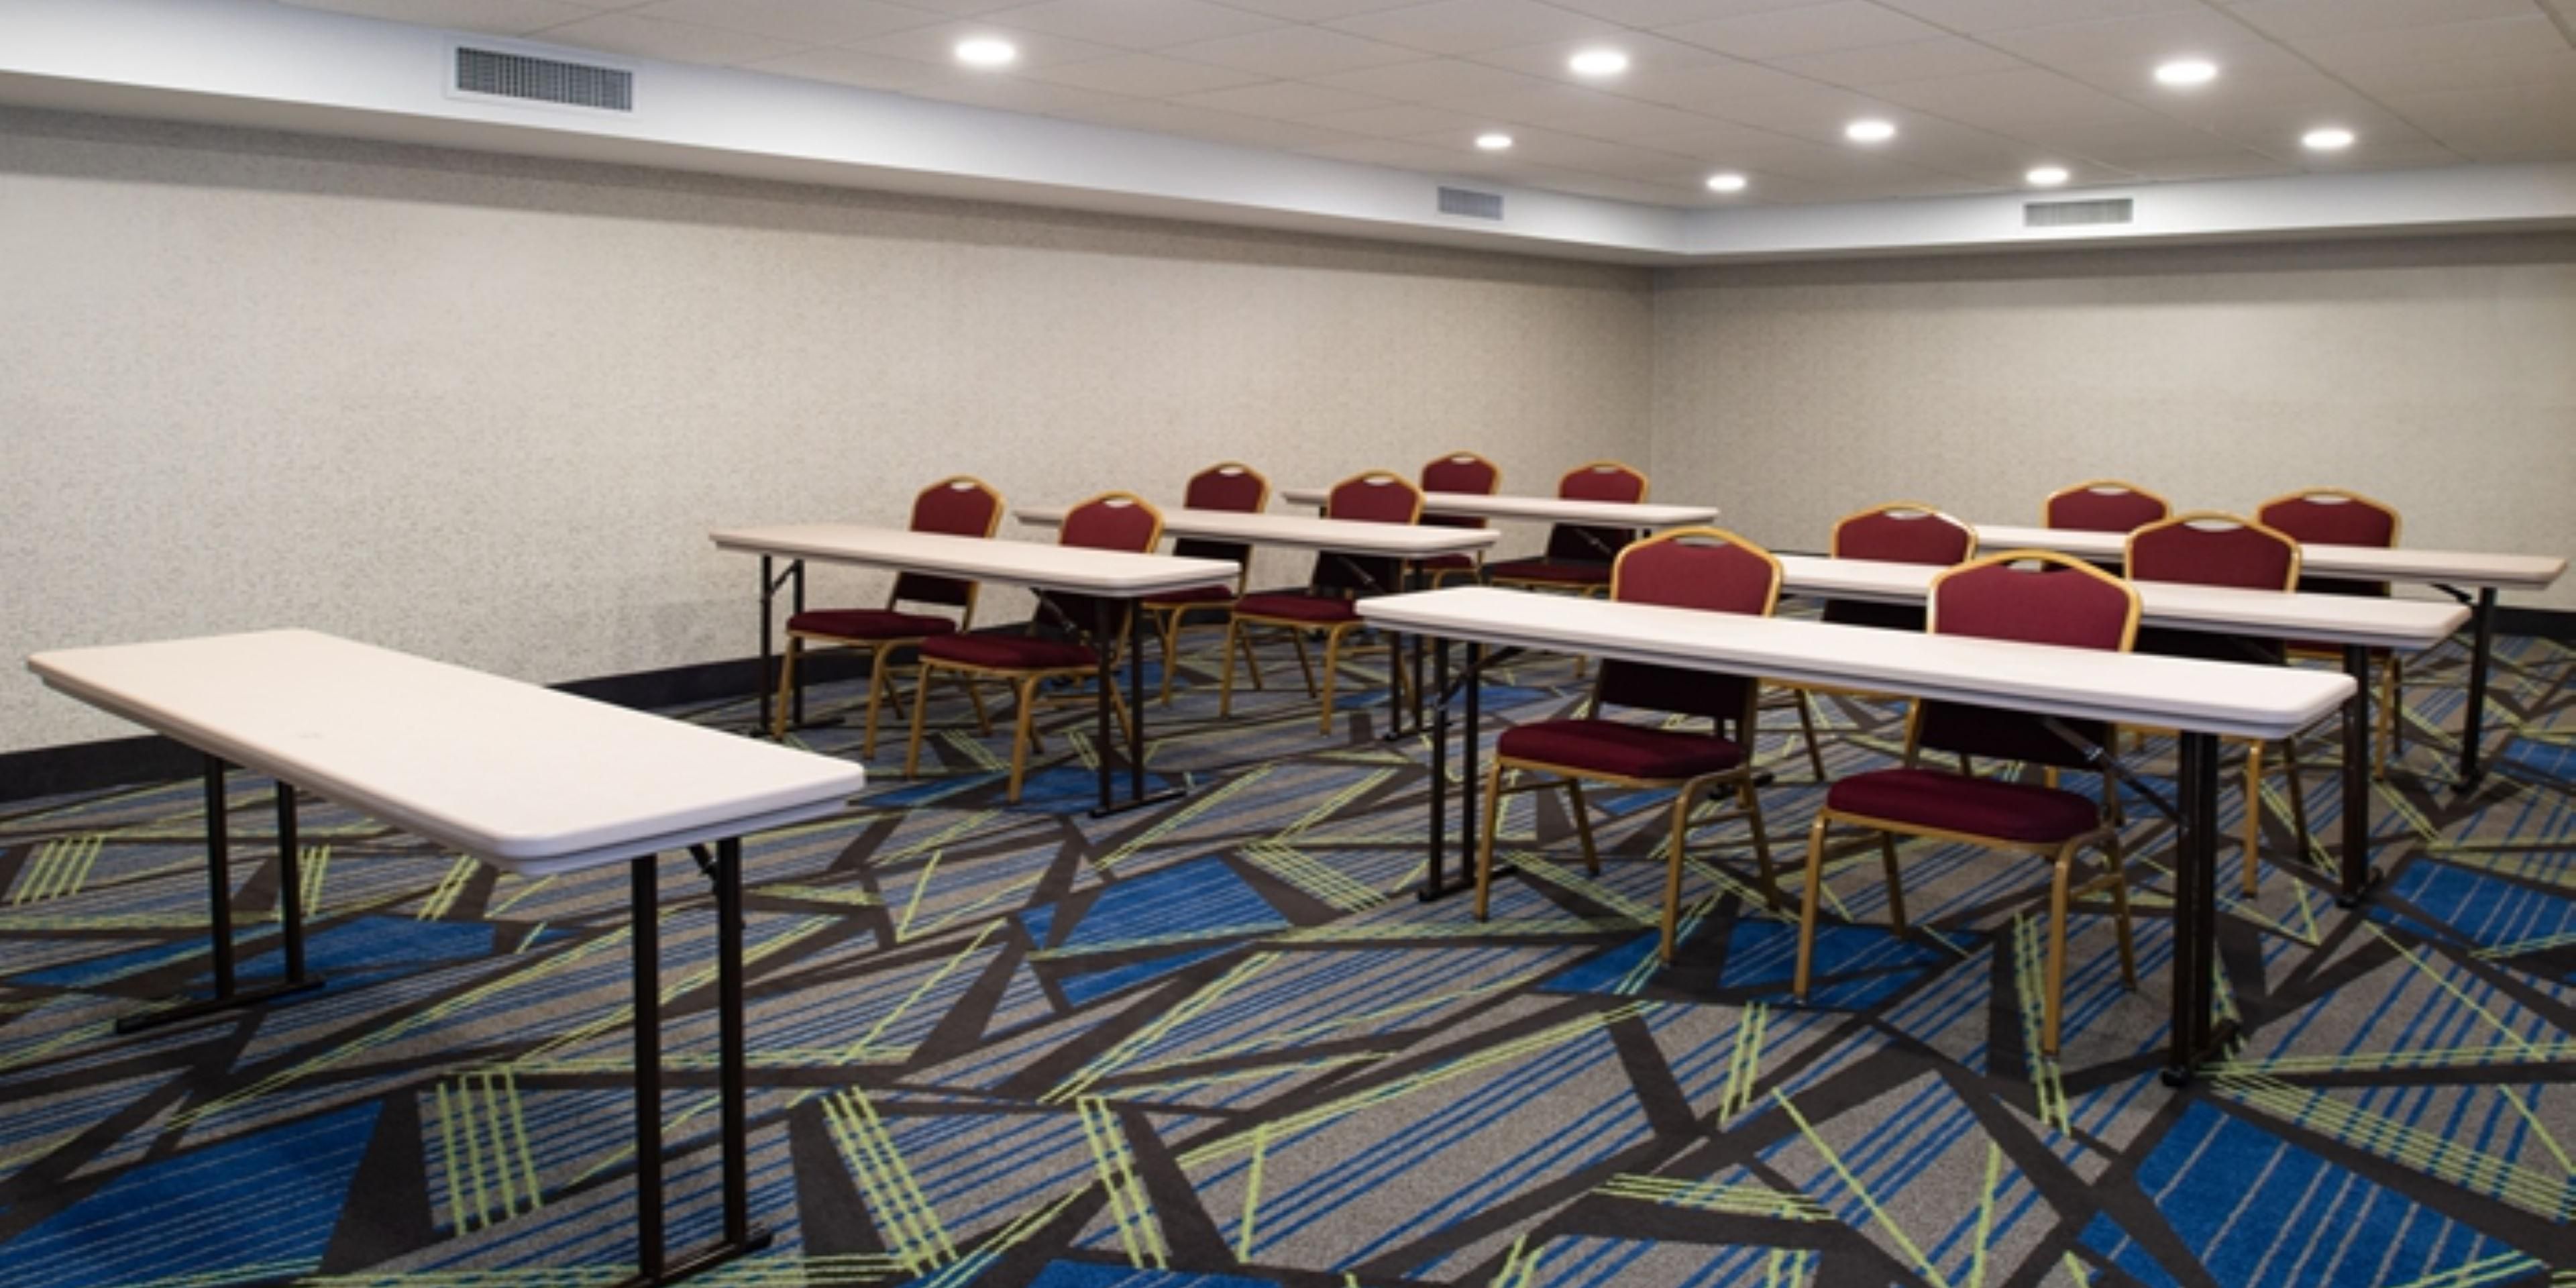 Call the Holiday Inn Express Sales team to reserve our beautiful meeting room with space for up to 40.